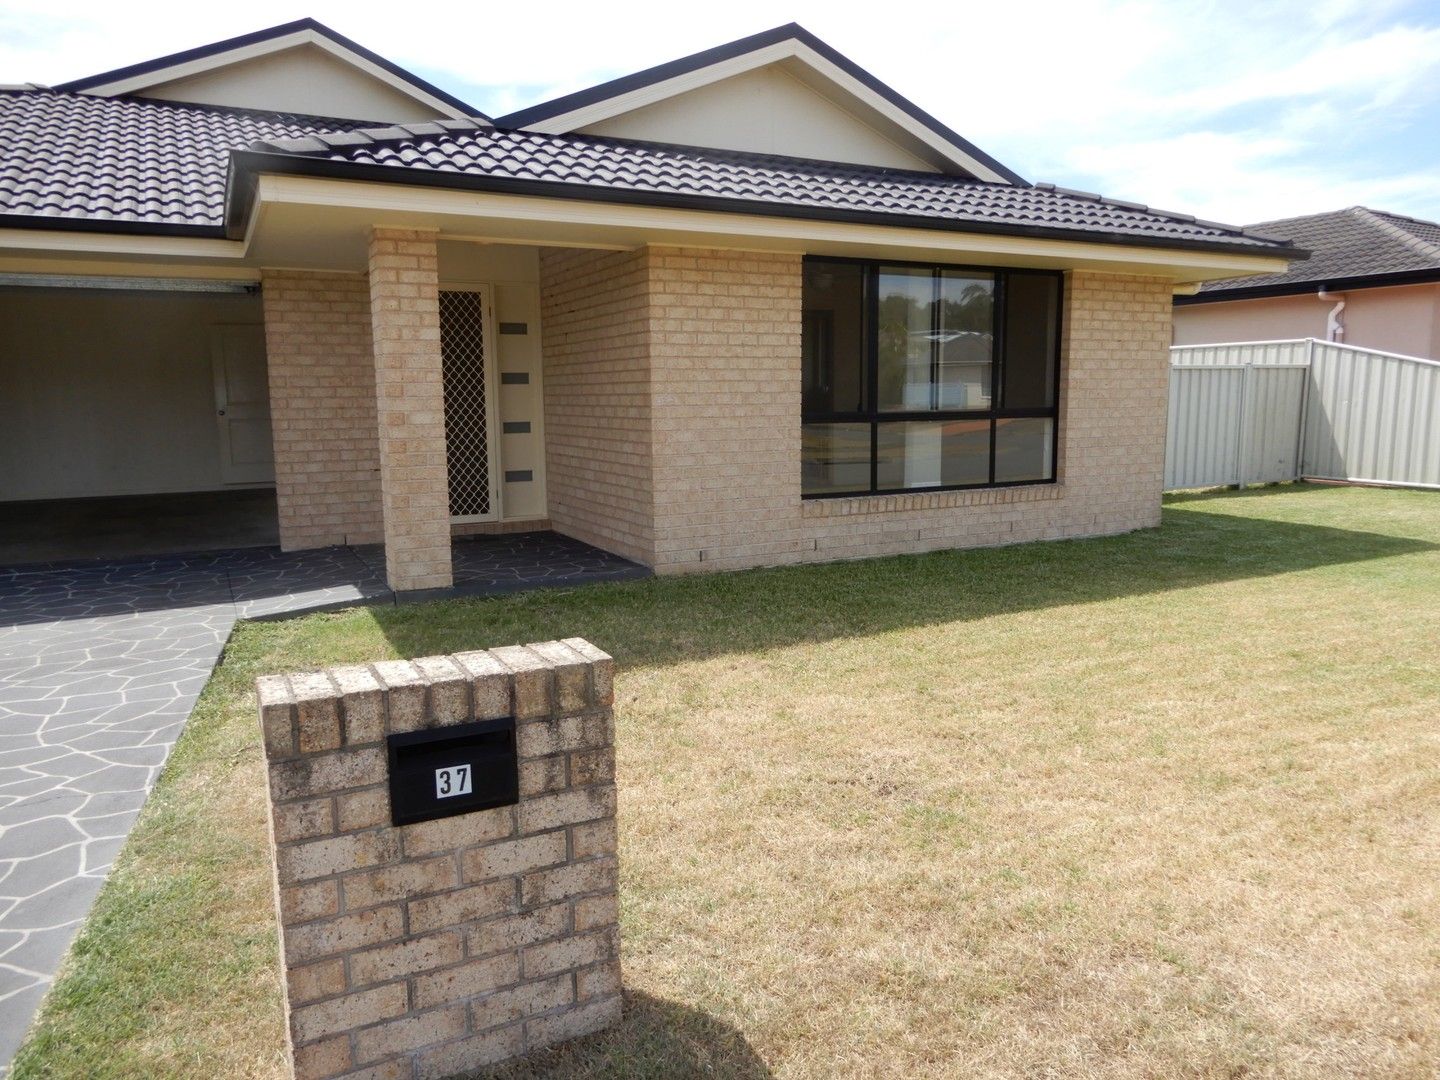 4 bedrooms House in 37 Wamara Crescent FORSTER NSW, 2428